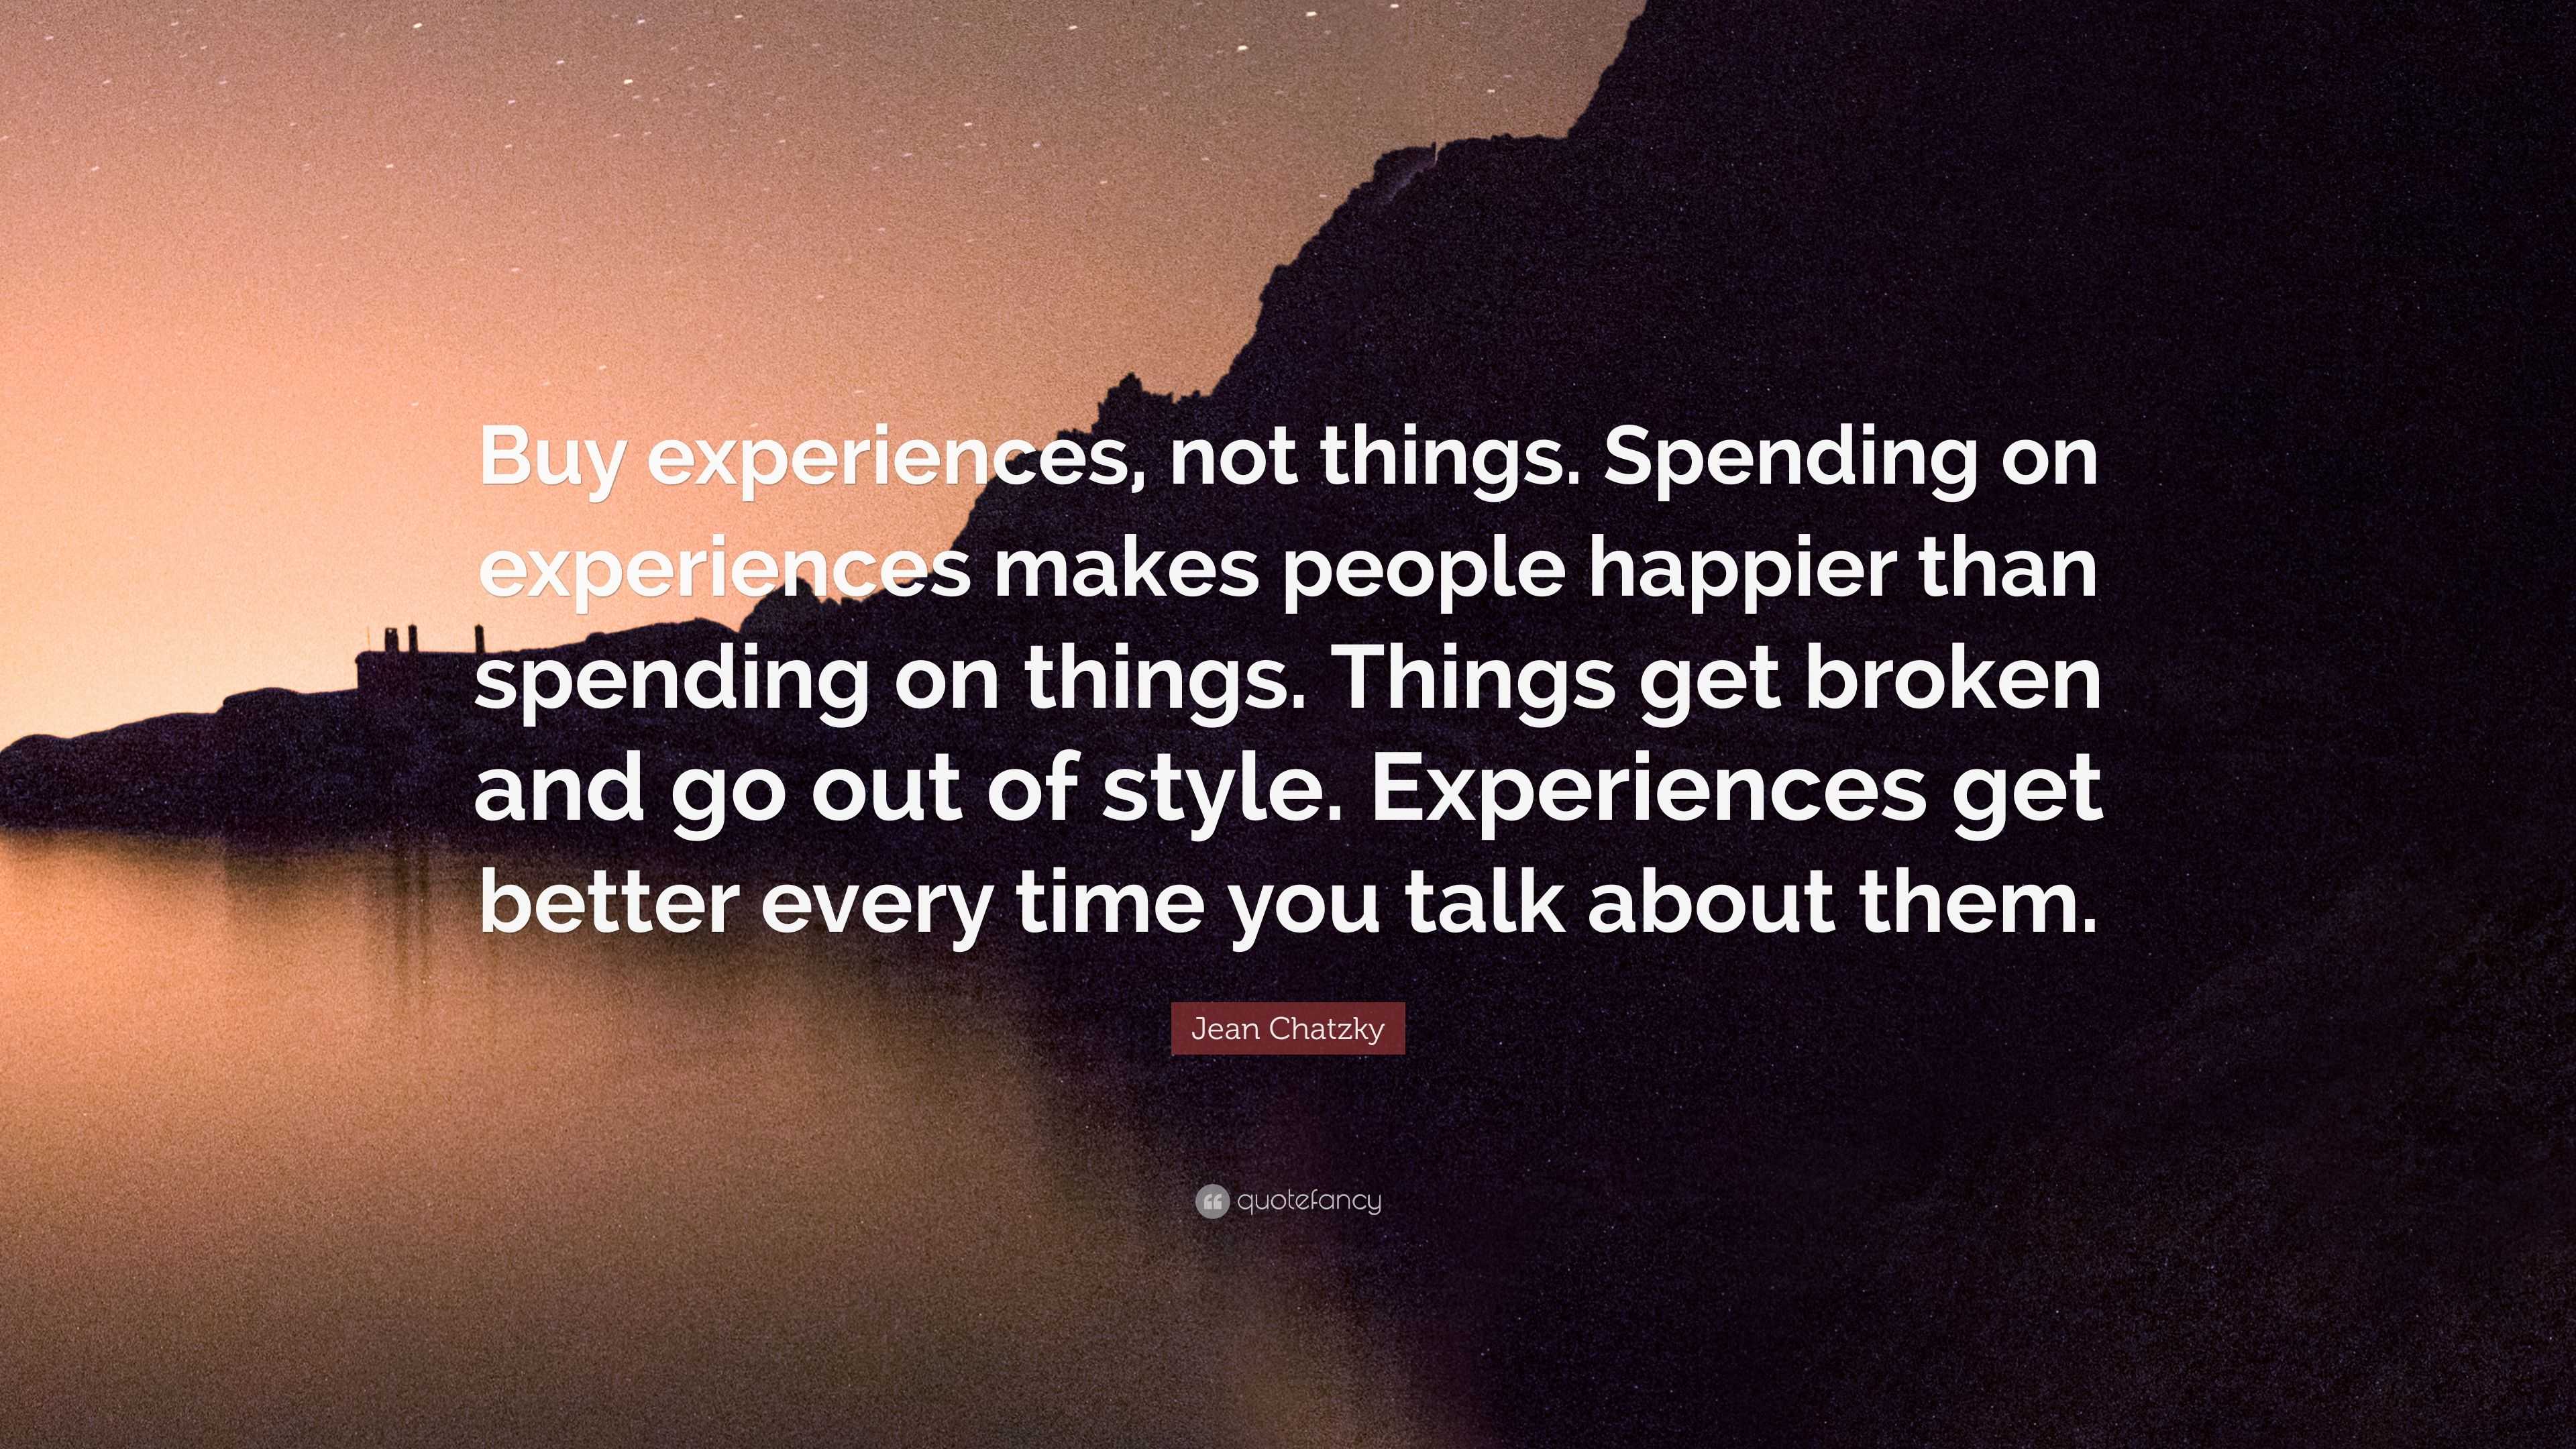 Jean Chatzky Quote “Buy experiences not things Spending on experiences makes people